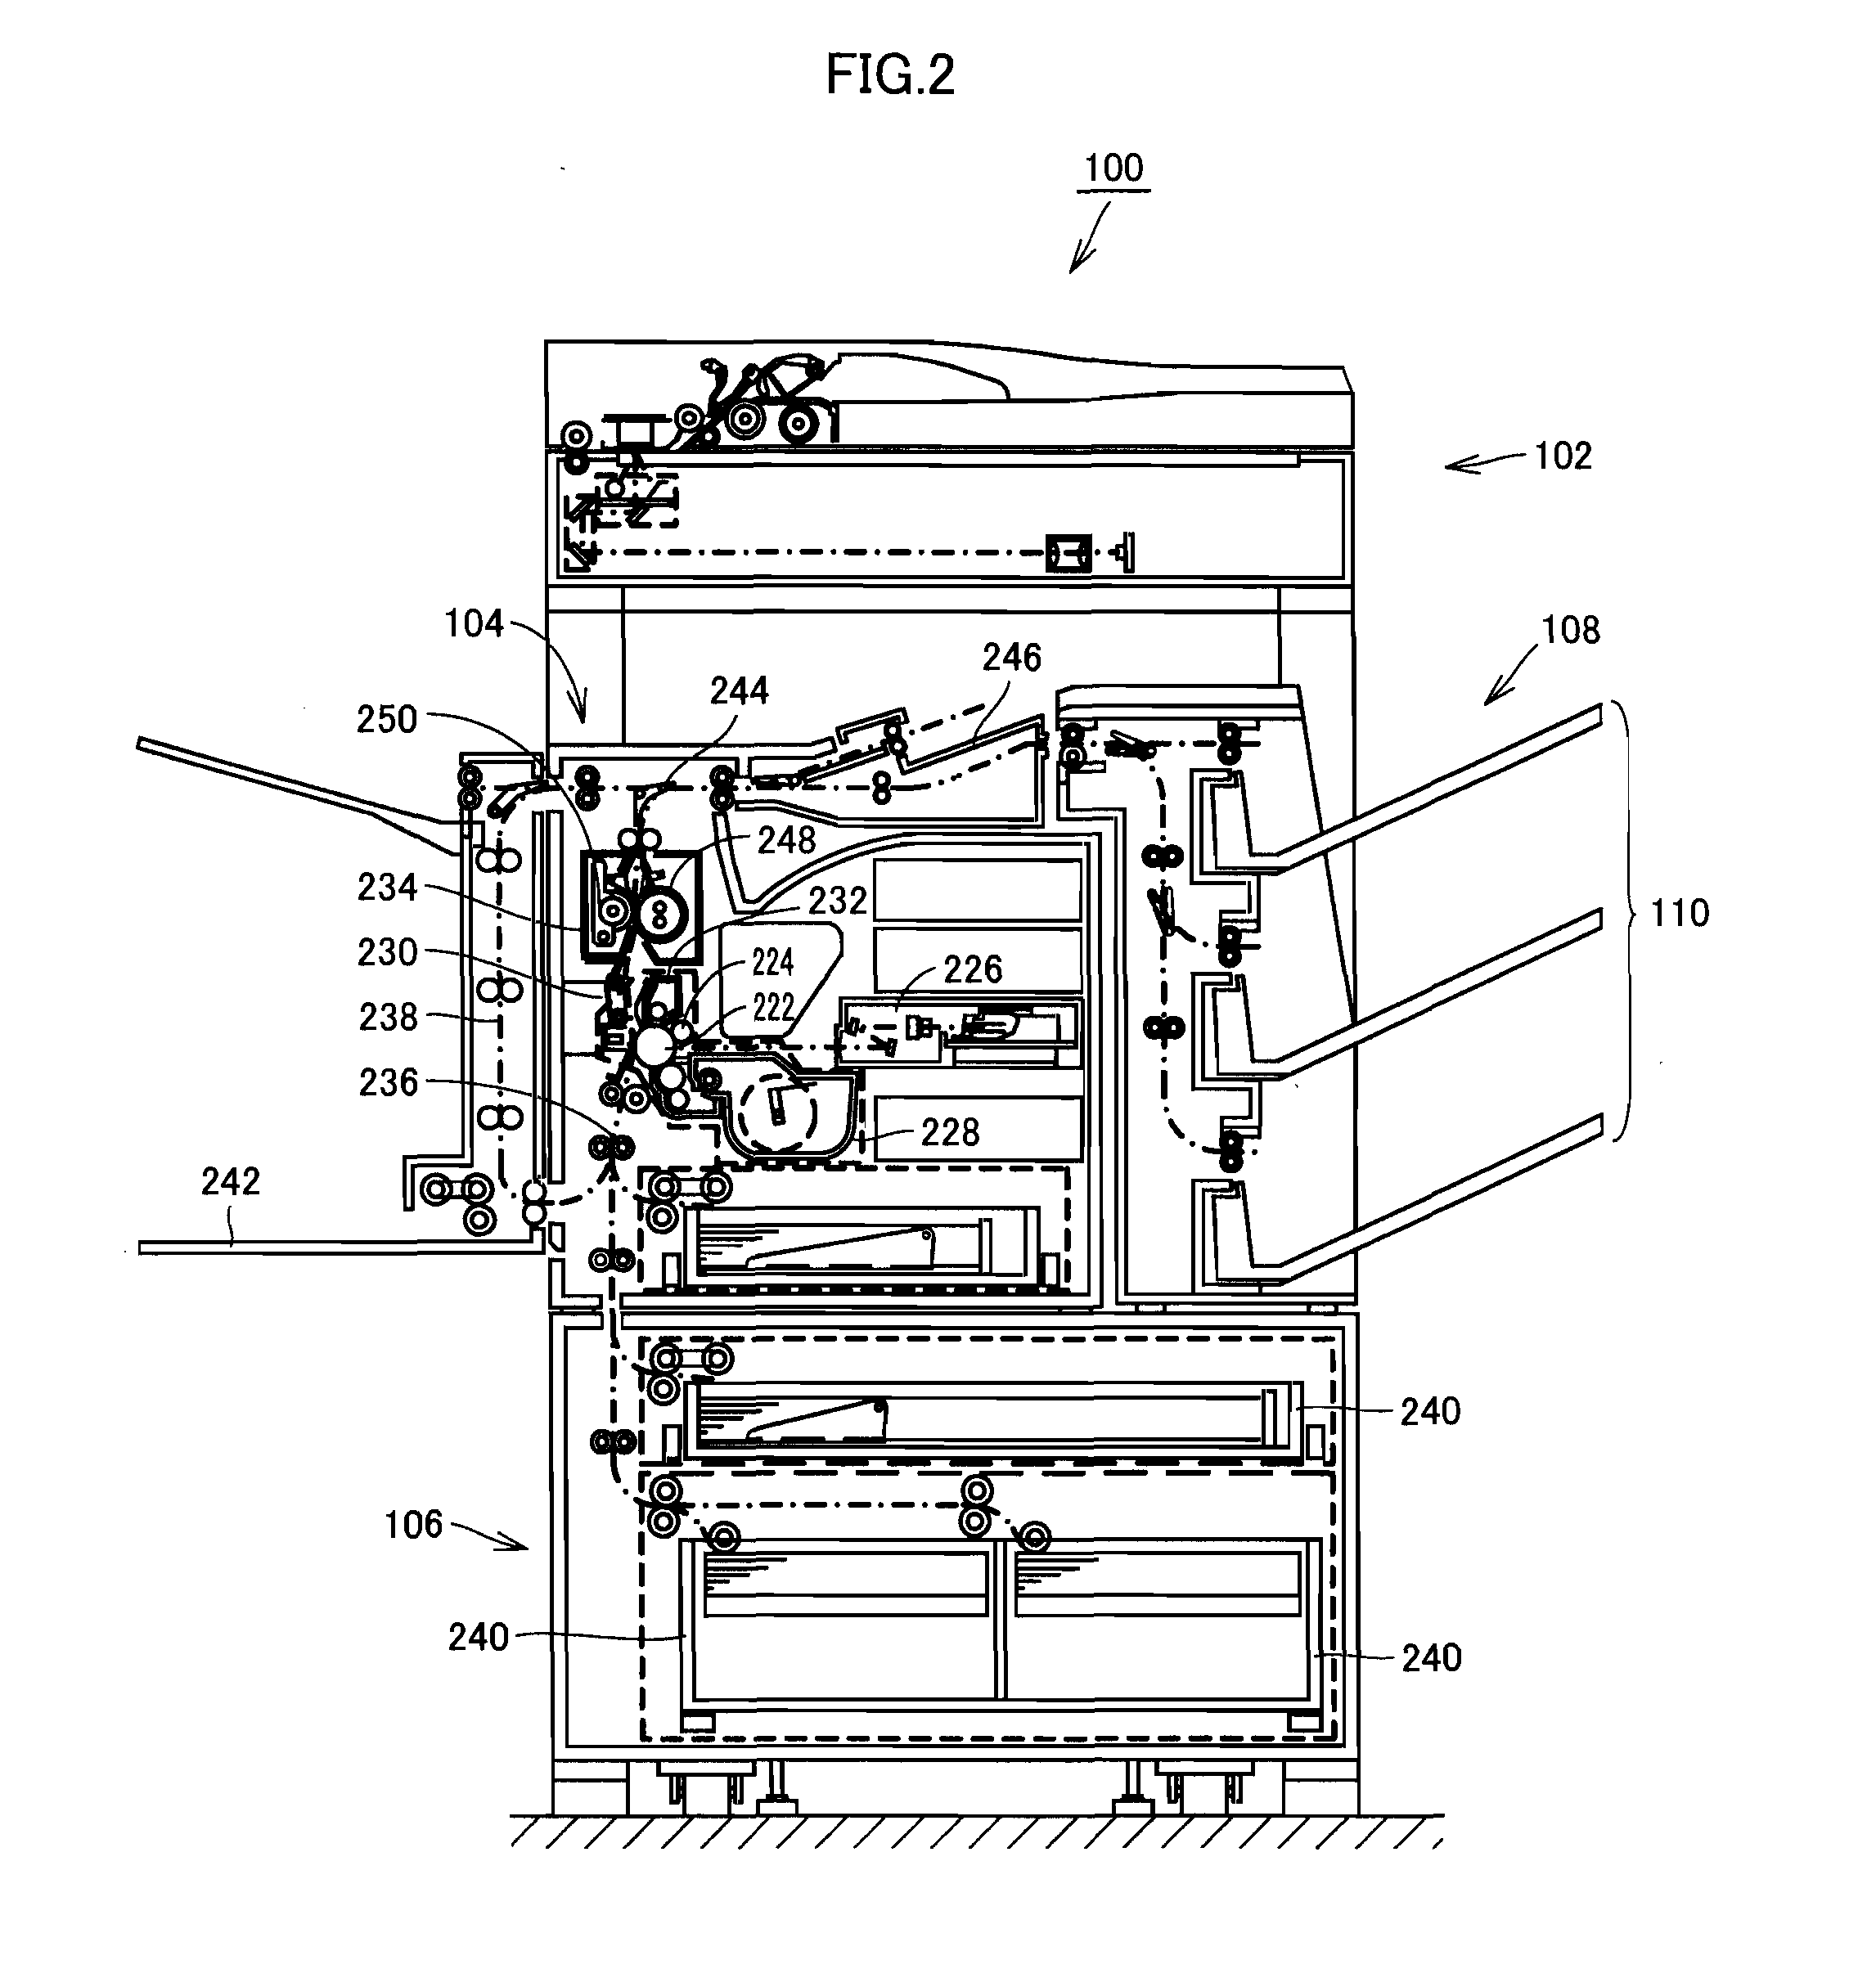 Display device, electronic device and image processing apparatus including the display device, and method of displaying information